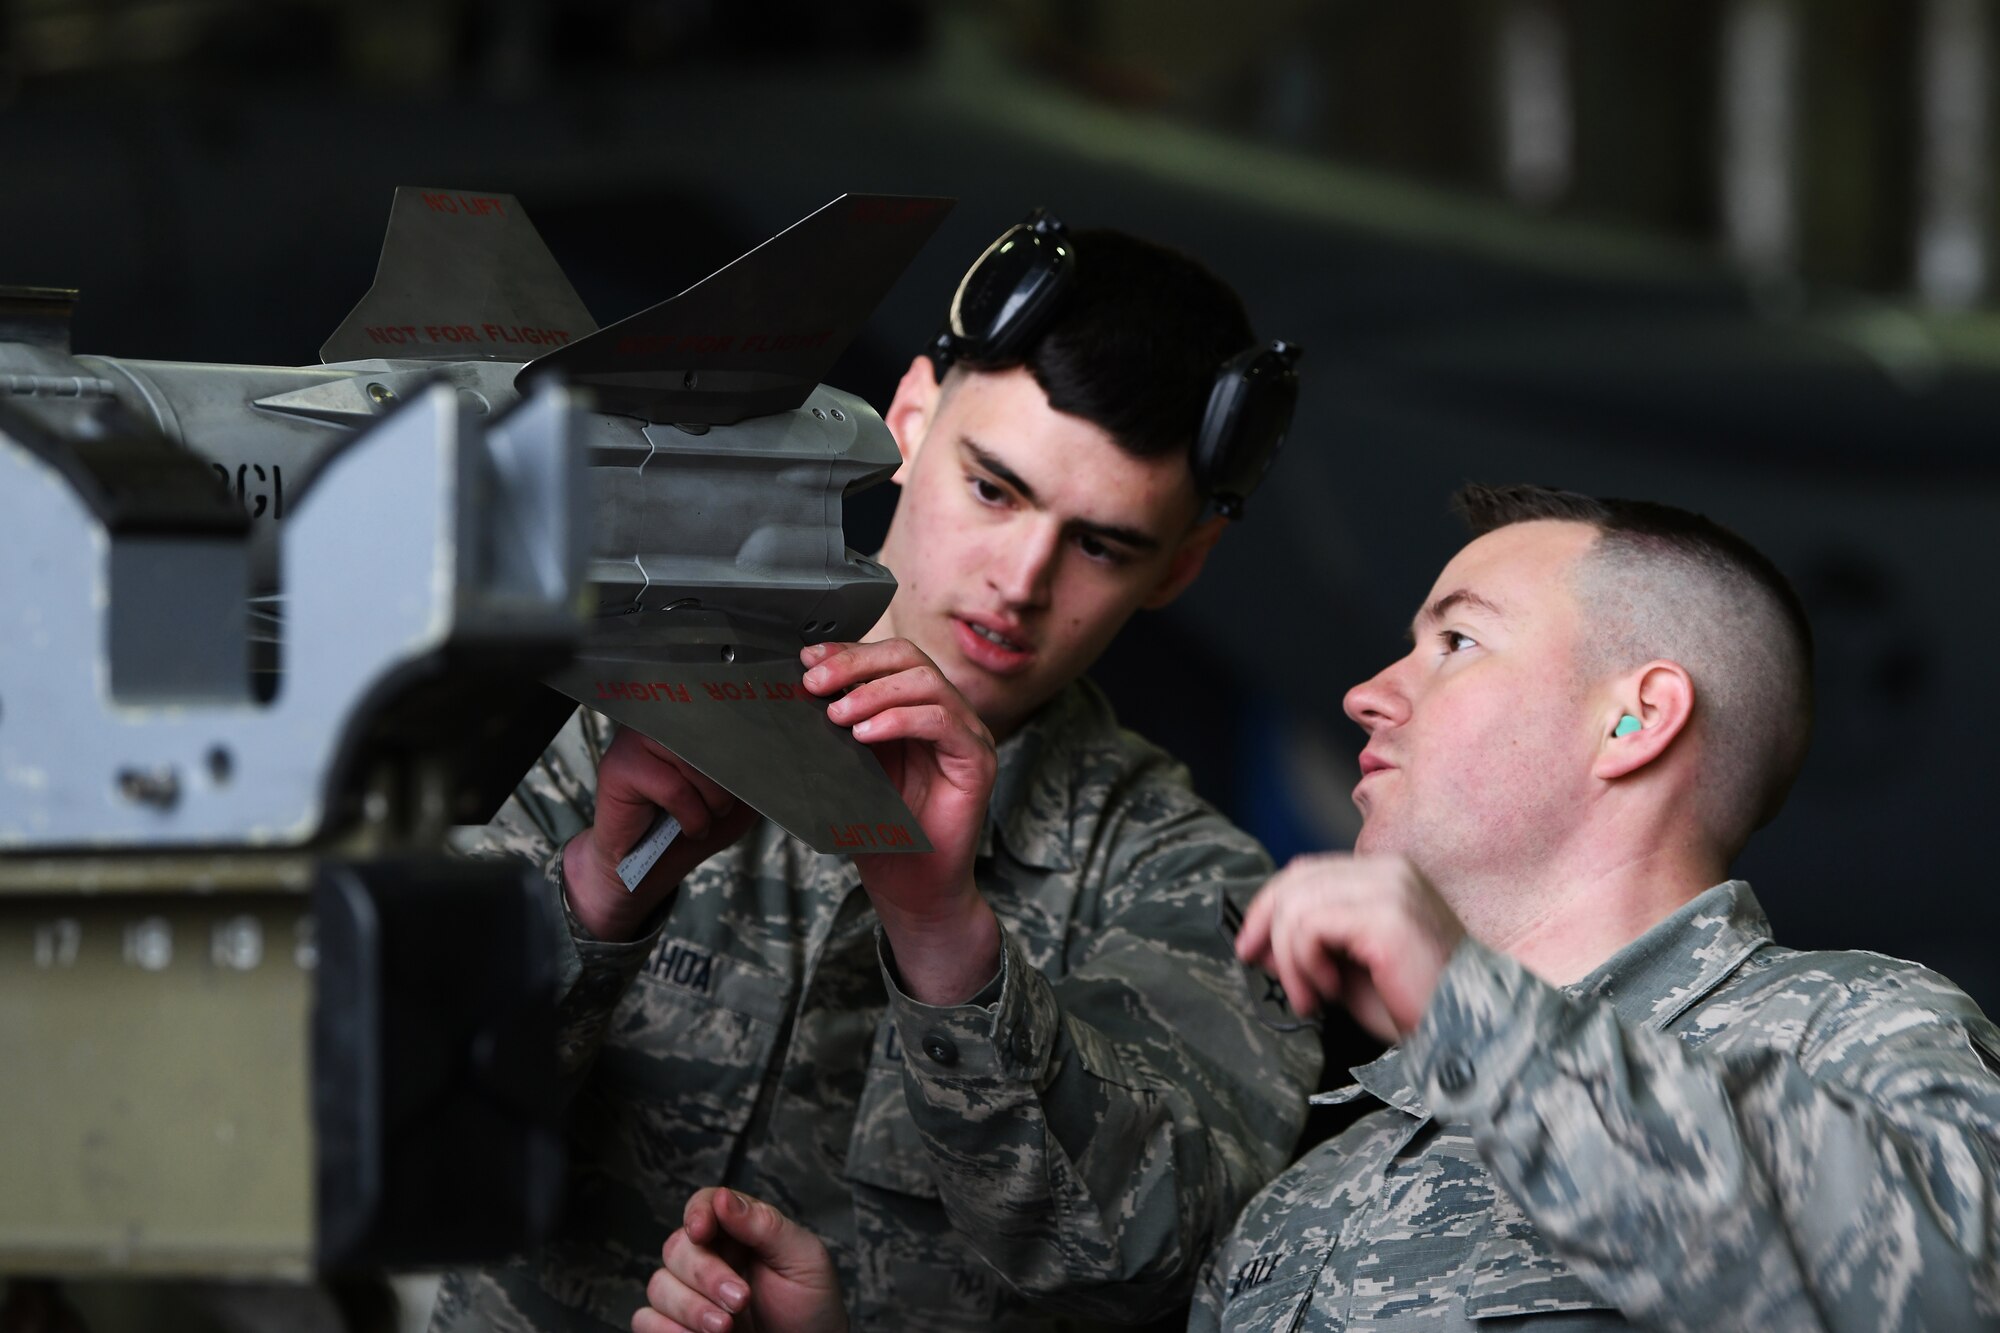 493rd weapons load crew members check an inert bomb during the 48th Fighter Wing 2018 Load Crew of the Year competition at Royal Air Force Lakenheath, England, Jan. 18, 2019.  The competition was a great opportunity for load crew members to test their skills and strengthen their teamwork. (U.S. Air Force photo by Airman 1st Class Shanice Williams-Jones)